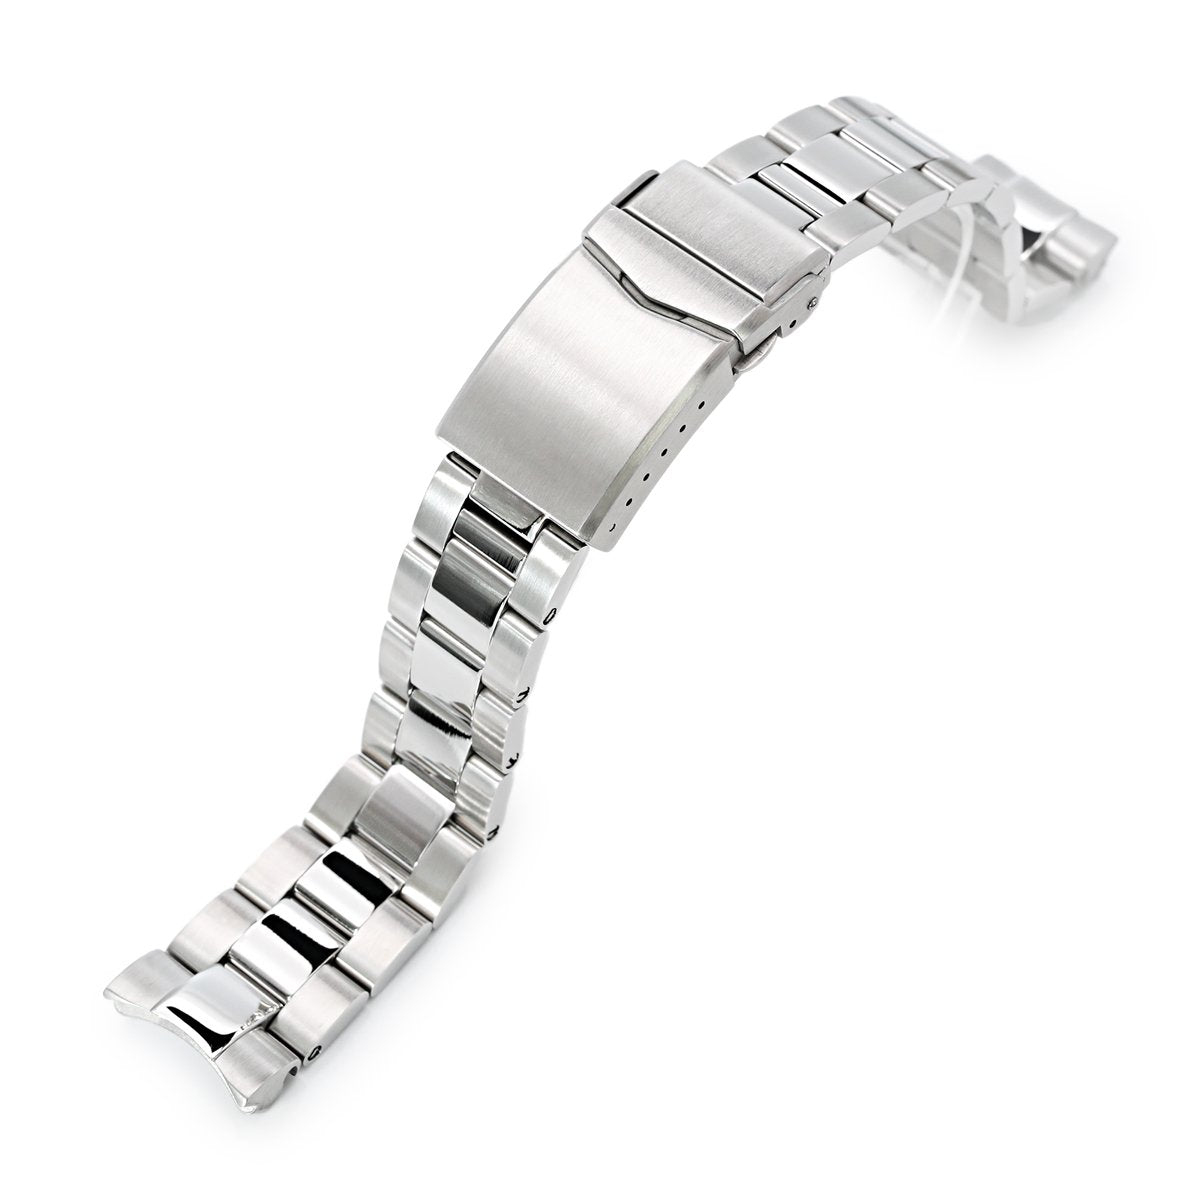 20mm Super-O Boyer 316L Stainless Steel Watch Bracelet for Seiko Mini Turtles SRPC35 V-Clasp Polished &amp; Brushed Strapcode Watch Bands